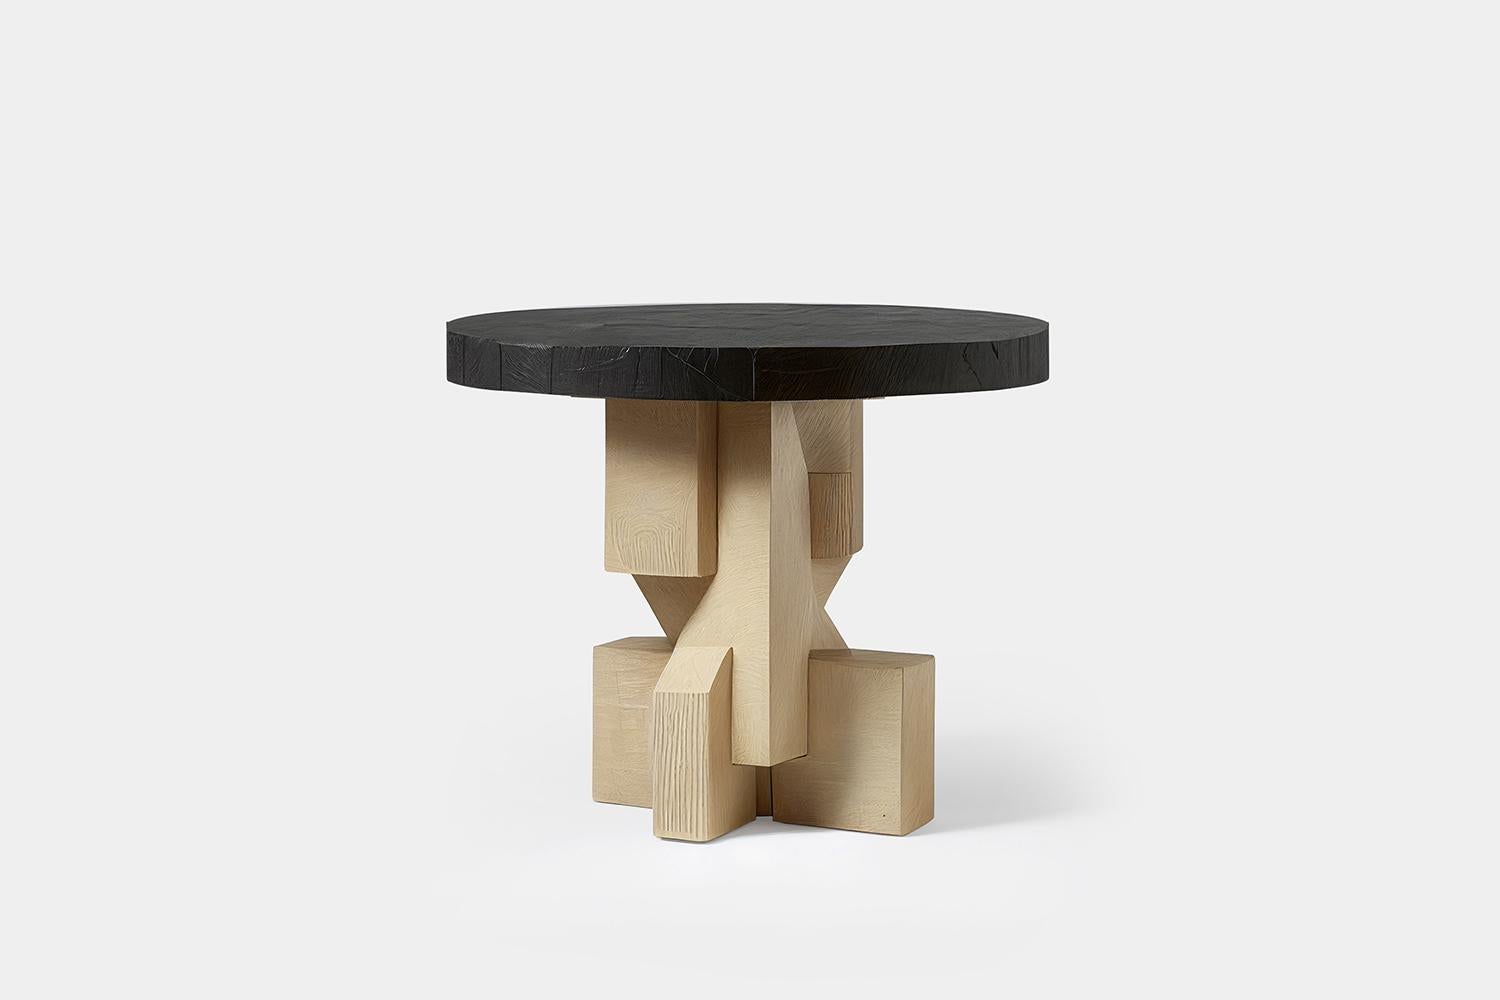 Hand-crafted solid thick maple side table with faceted base and black round table top. 
Product made to order; some variances may apply to the final piece. 

——

NONO is a Mexican design brand with more than 10 years of experience dedicated to